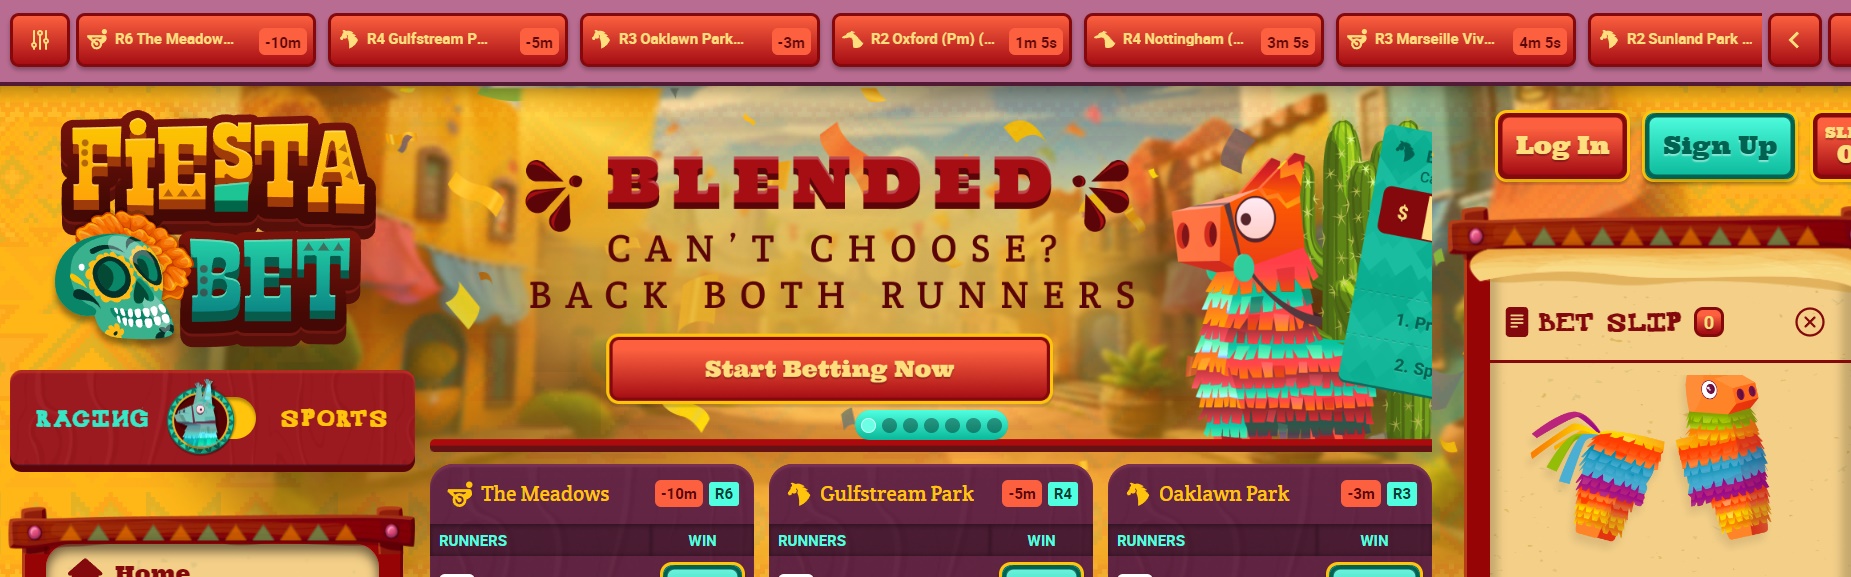 No This is Not a Kids Website, It’s an Online Bookie Called Fiesta Bet – You’d Have to Be Kidding Wouldn’t You?